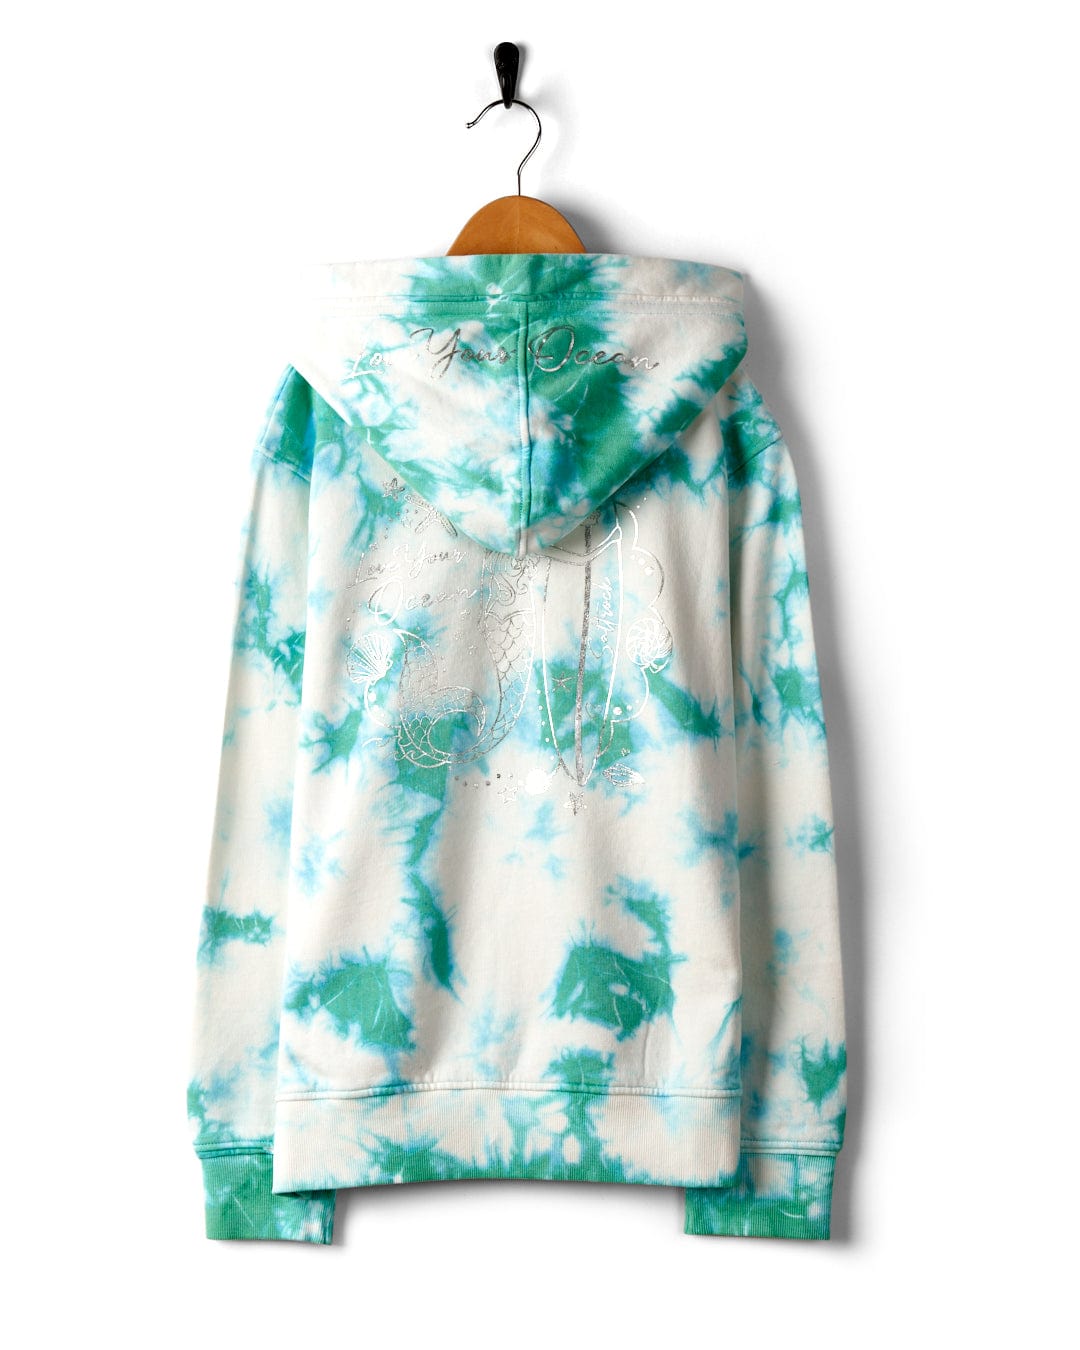 A "Mermaid Surf - Kids Tie Dye Pop Hoodie - Turquoise/White" hoodie with blue and green patterns on a wooden hanger against a white background.